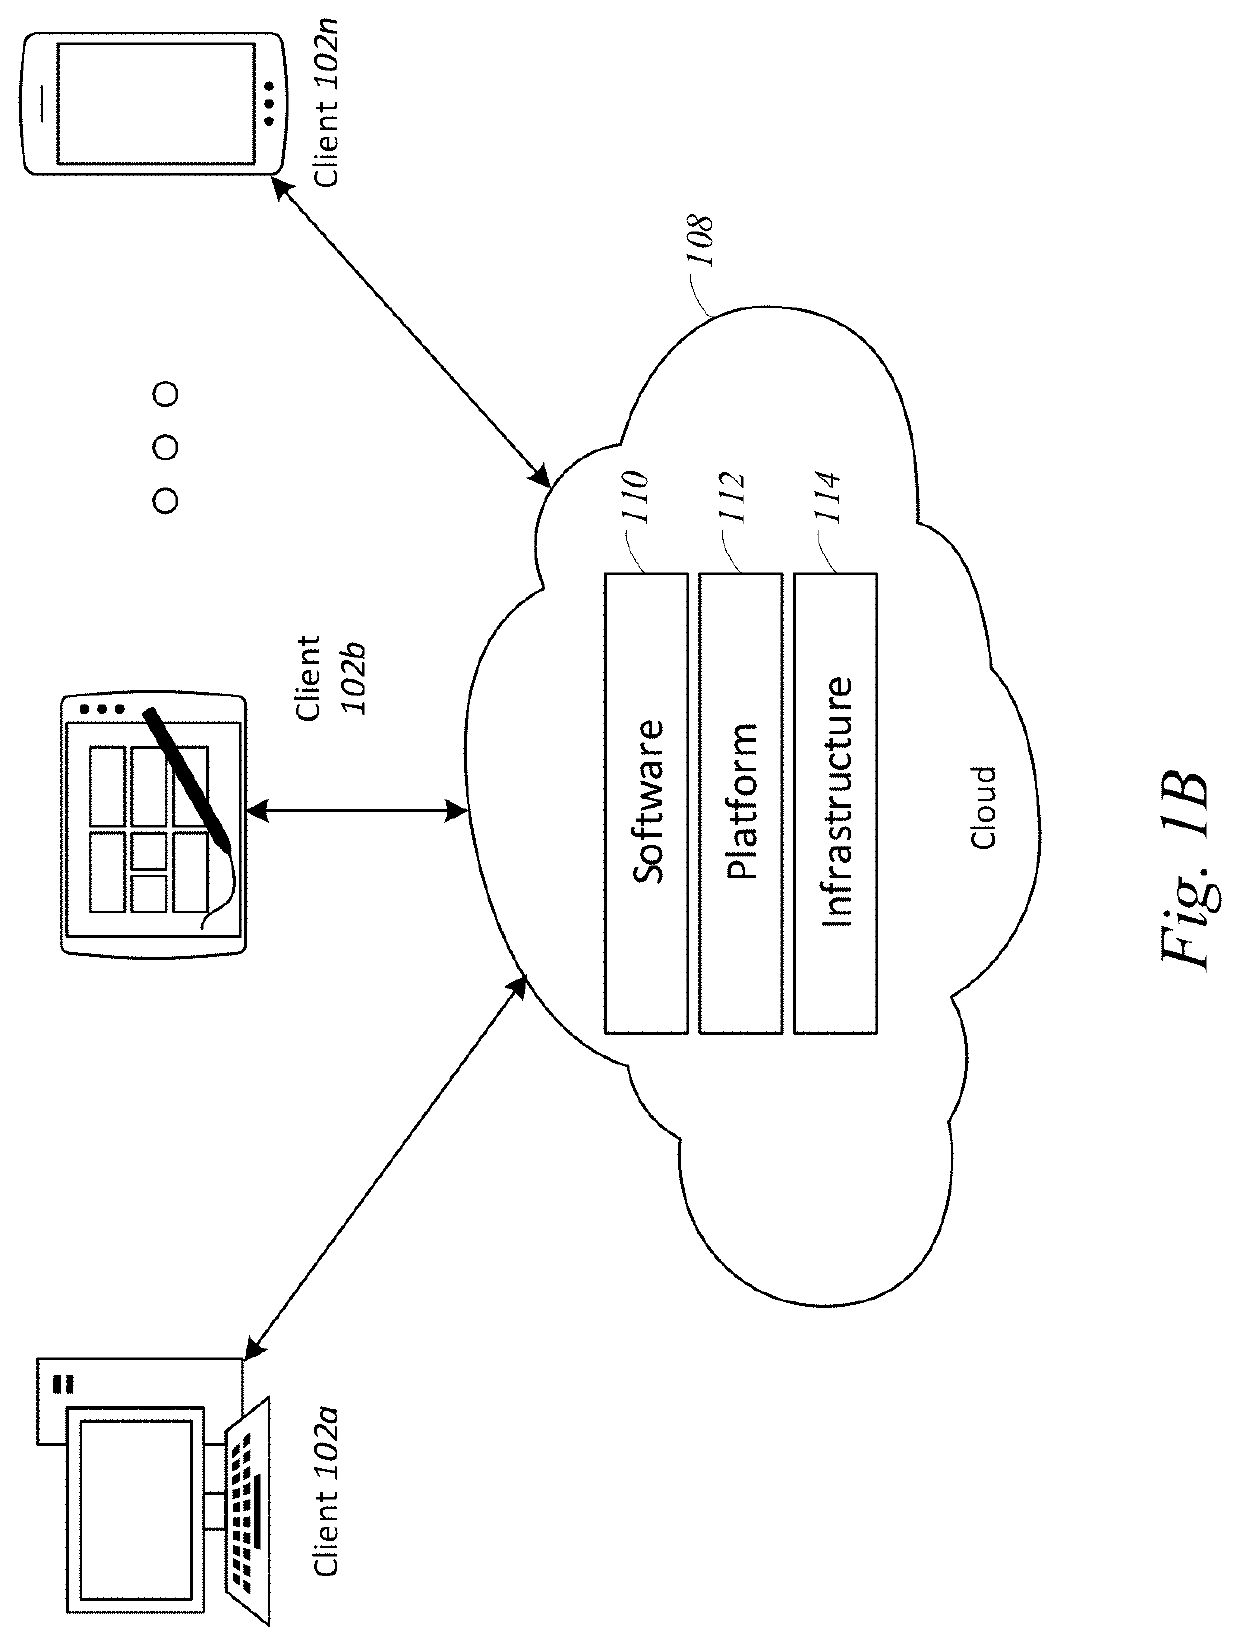 Systems and methods for using attribute data for system protection and security awareness training